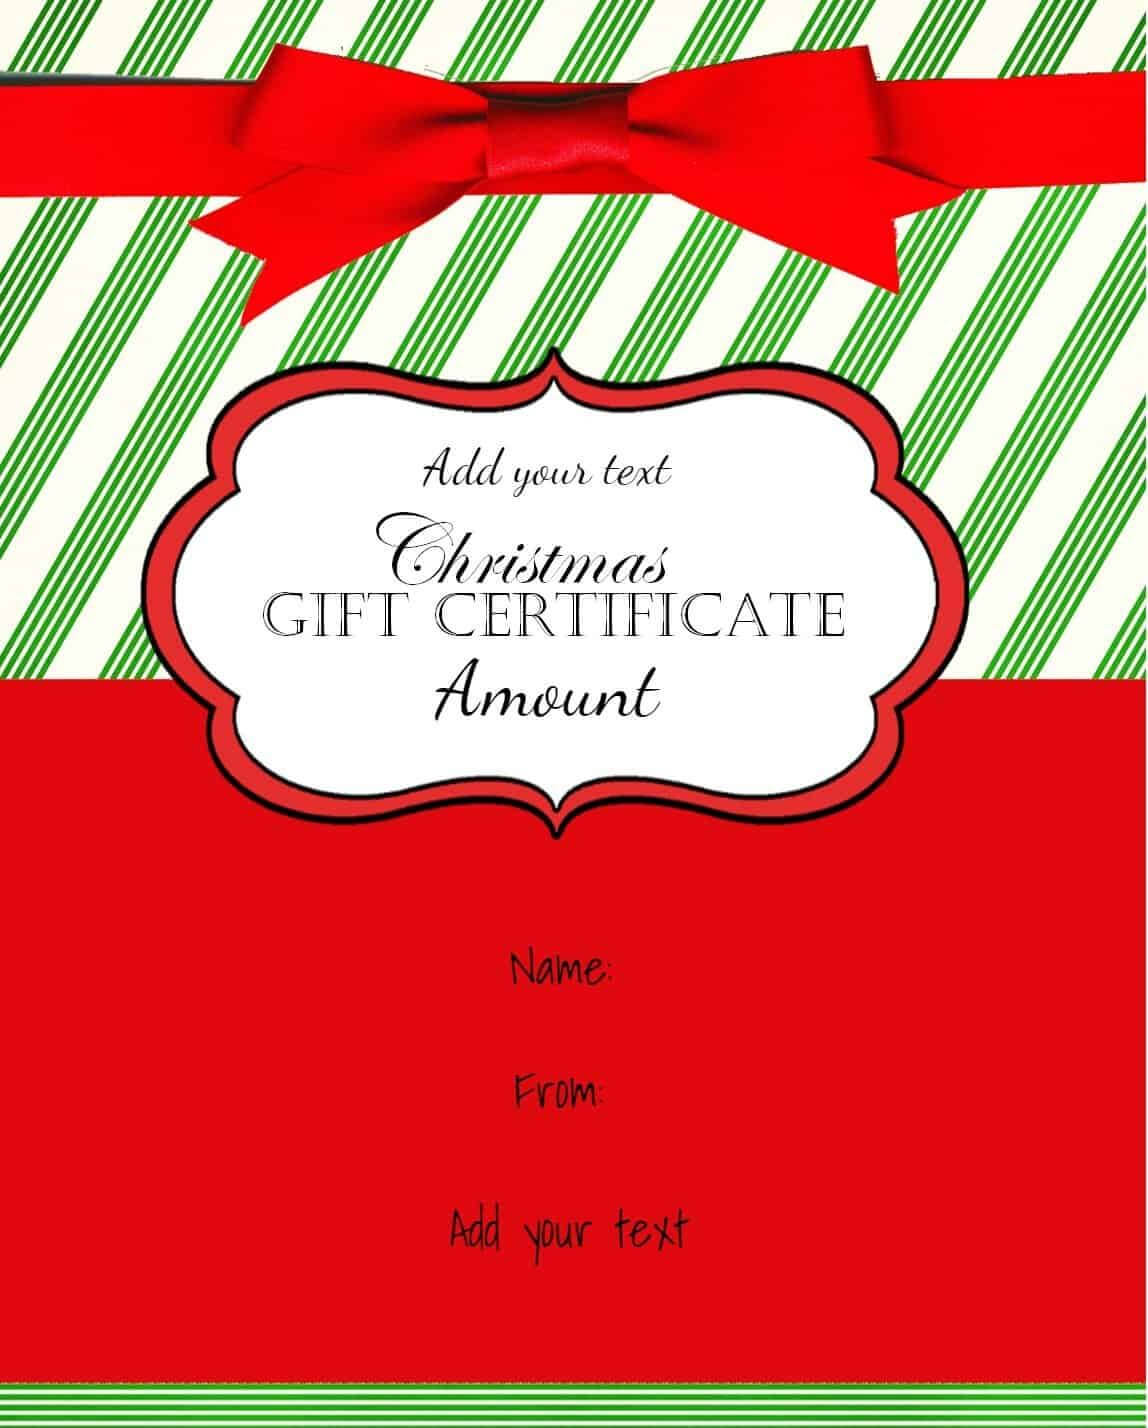 14+ New Year Gift Certificate Templates | Free Printable In Free Christmas Gift Certificate Templates